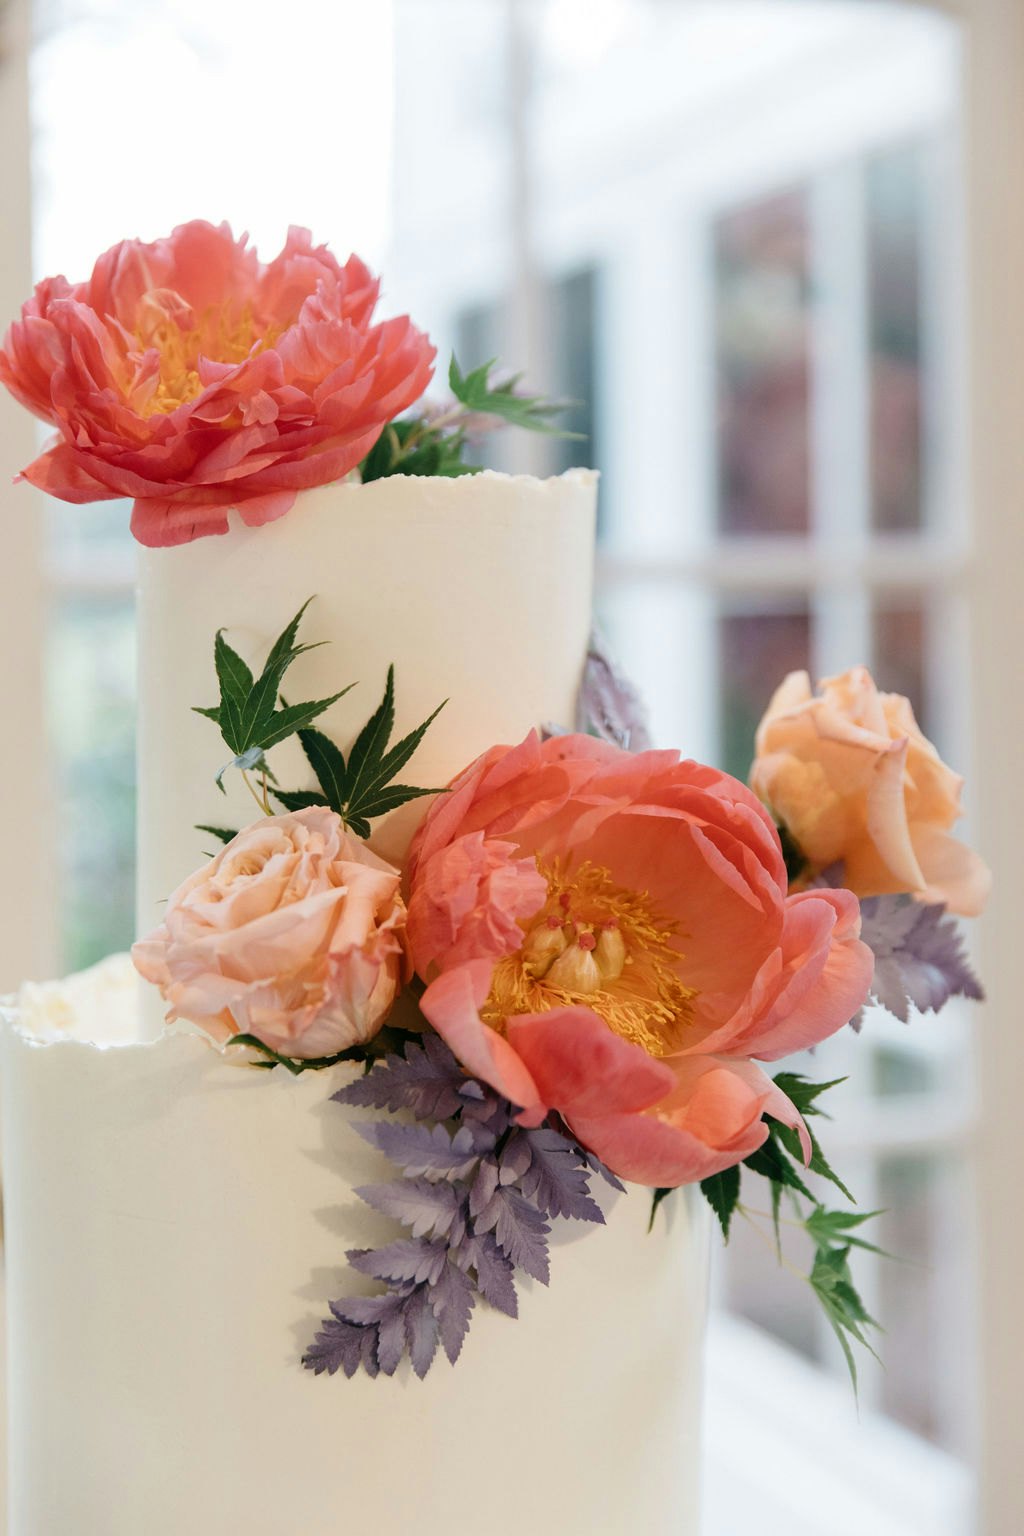 Colourful flowers on wedding cakes 